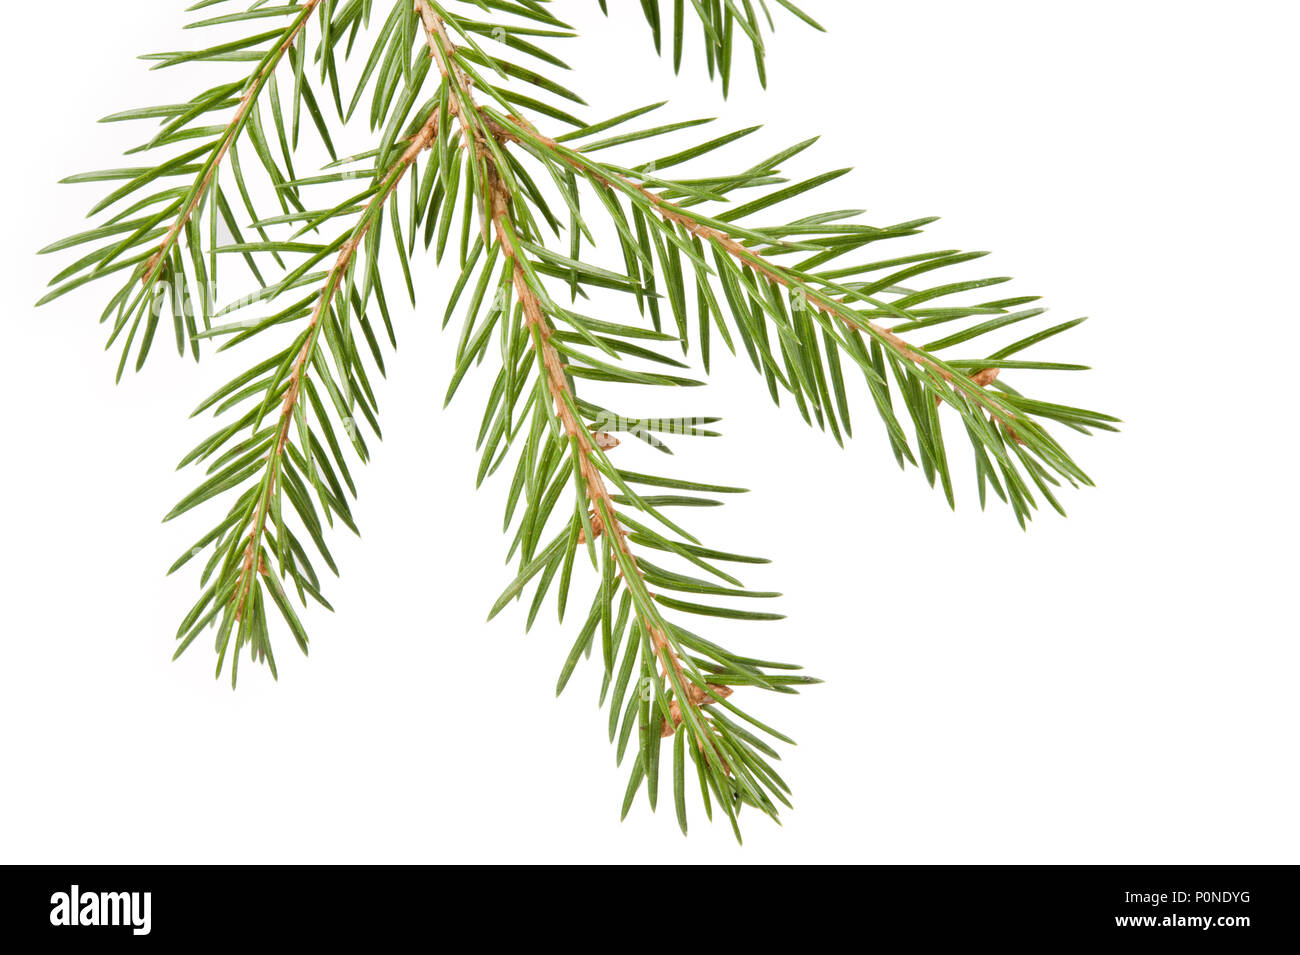 Spruce (Picea abies) branch and needles isolated on white background. Stock Photo